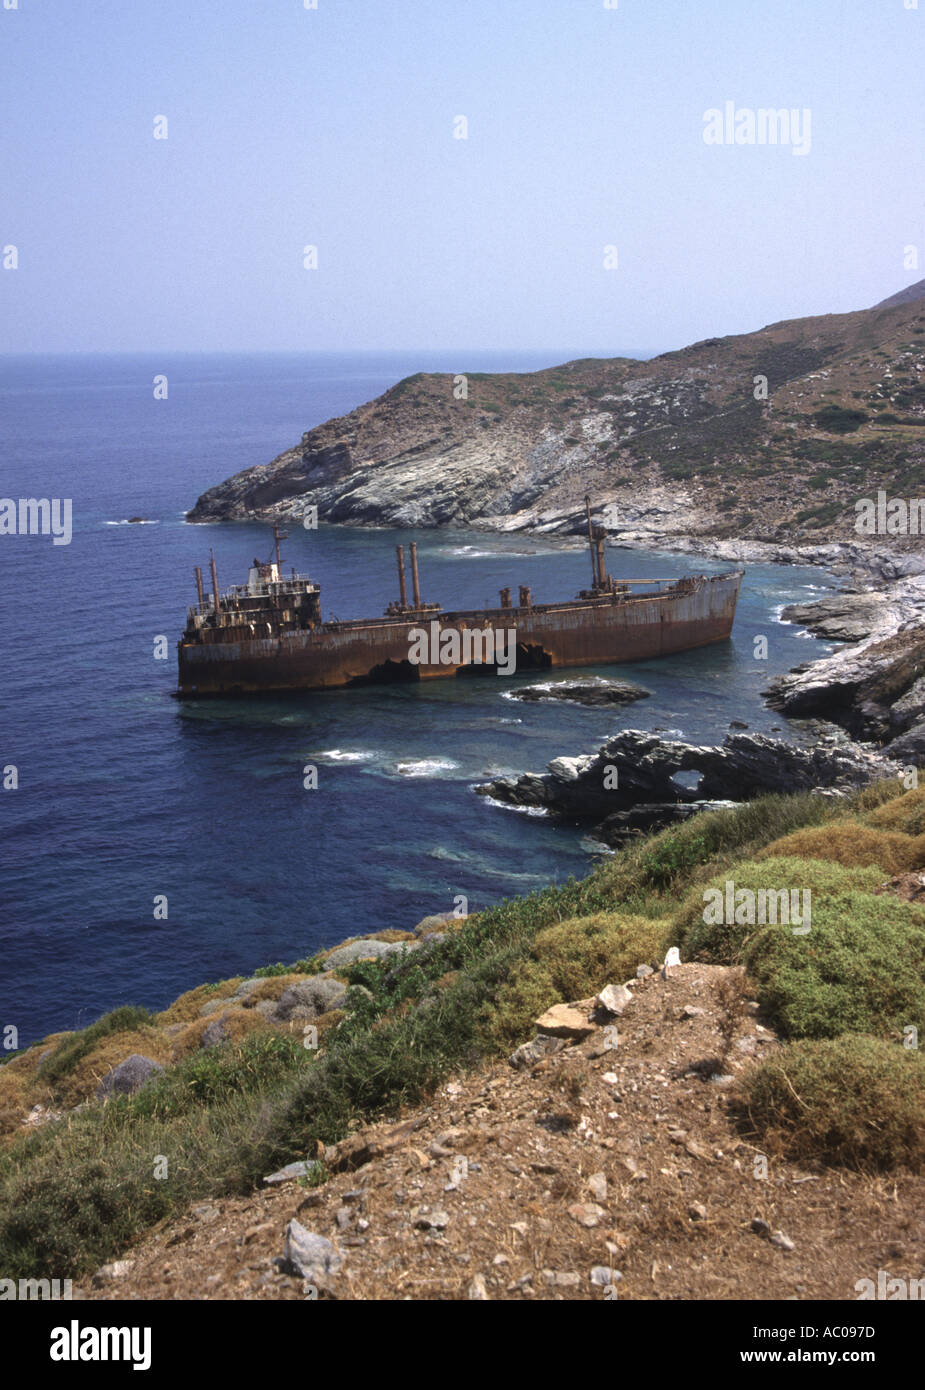 Ship wrecked on the Greek island of Andros Stock Photo